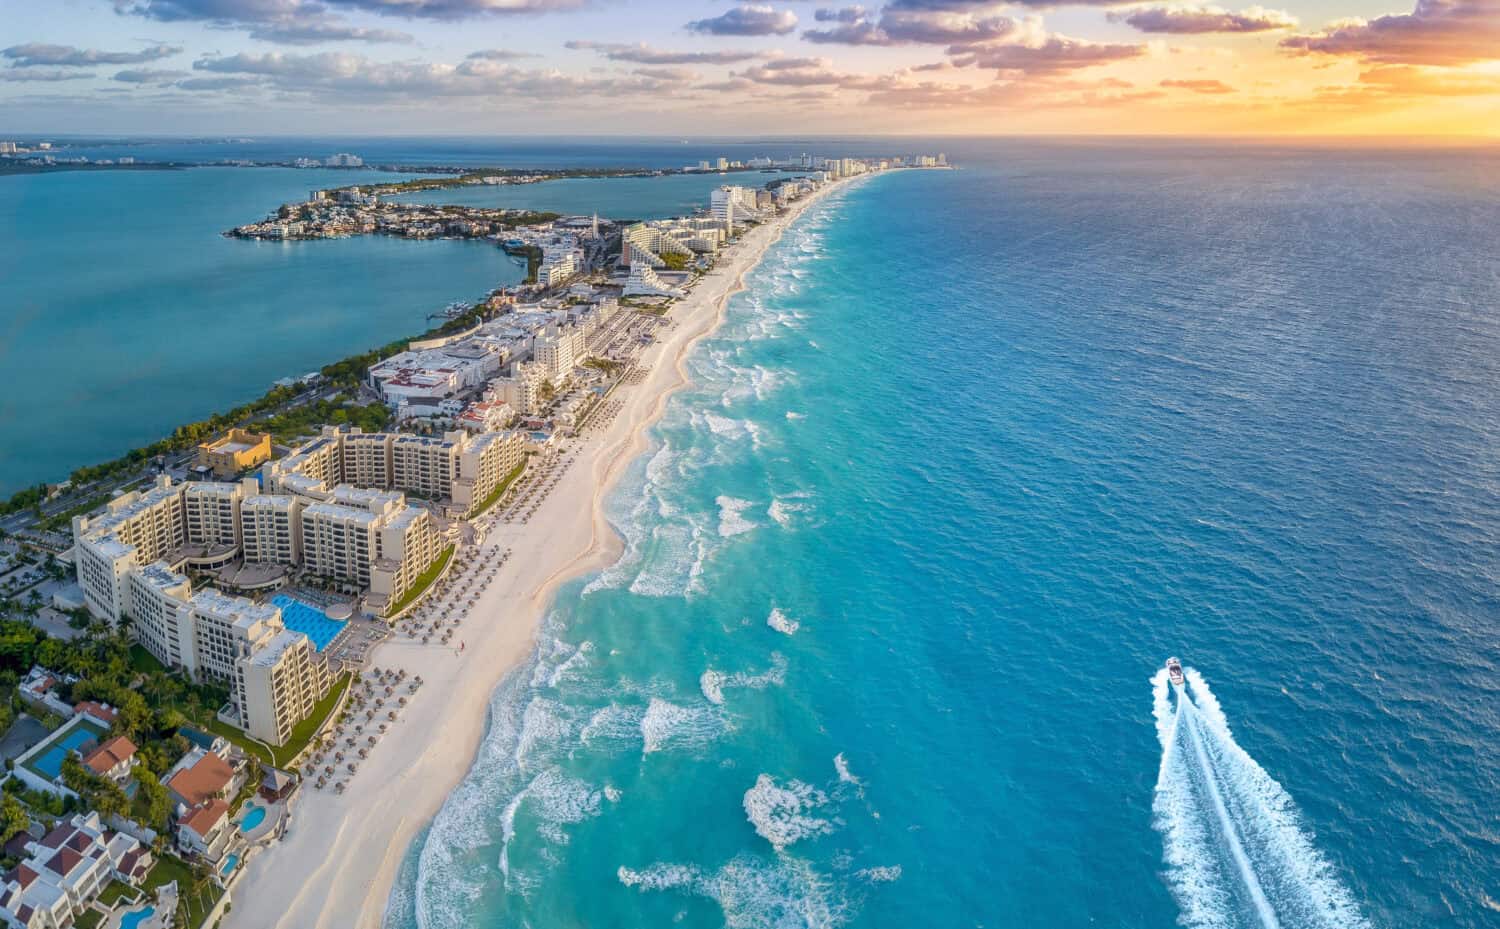 <p>As one of the premiere locations in Mexico, Cancun has long been a <a href="https://247wallst.com/topics/most-overrated-tourist-attractions-in-the-world/?utm_source=msn&utm_medium=referral&utm_campaign=msn&utm_content=most-overrated-tourist-attractions-in-the-world&wsrlui=213954061">top tourist destination</a>. Between white sand beaches, Mayan ruins, a nightlife that never stops, and all-inclusive resorts, Cancun is hard to beat. Regarded as the crown jewel of the Mexican Caribbean, there is something for everyone which is why Cancun draws millions of tourists every year.</p> <p>It is with this in mind that we want to take a look at how much a week-long trip to Cancun will cost you. After reviewing pricing from <a href="https://www.tripadvisor.com/" rel="noopener noreferrer">TripAdvisor</a>, <a href="https://www.kayak.com/" rel="noopener noreferrer">Kayak</a>, <a href="https://www.expedia.com/" rel="noopener noreferrer">Expedia</a>, and <a href="http://trip.com/" rel="noopener noreferrer">Trip.com</a>, we can put together two great sample itineraries. The first is an overview of what a trip to Cancun on a budget could look like and the second covers one possible trip to Cancun if money is no object. Of course, please note these prices are just estimates as the cost to travel to Cancun varies considerably depending on many factors.</p> <div class='fwpPitch'><h2><strong>ALERT: Take This Retirement Quiz Now  (Sponsored)</strong></h2> <p><a href="https://smartasset.com/retirement/find-a-financial-planner?utm_source=247wallst&utm_campaign=SA_AdvisorPitch2&utm_content=desktop|how-much-a-trip-to-cancun-will-cost-on-a-budget-or-in-style|1395406&utm_term=Microsoft&utm_medium=eoaCTALinkDefault" rel="noopener nofollow sponsored">Take the quiz below to get matched with a financial advisor today.</a></p> <p>Each advisor has been vetted by SmartAsset and is held to a fiduciary standard to act in your best interests.</p> <p>Here’s how it works:<br> 1. <a href="https://smartasset.com/retirement/find-a-financial-planner?utm_source=247wallst&utm_campaign=SA_AdvisorPitch2&utm_content=desktop|how-much-a-trip-to-cancun-will-cost-on-a-budget-or-in-style|1395406&utm_term=Microsoft&utm_medium=eoaCTALinkDefault" rel="noopener nofollow sponsored">Answer SmartAsset advisor match quiz</a><br> 2. Review your pre-screened matches at your leisure. Check out the advisors’ profiles.<br> 3. <a href="https://smartasset.com/retirement/find-a-financial-planner?utm_source=247wallst&utm_campaign=SA_AdvisorPitch2&utm_content=desktop|how-much-a-trip-to-cancun-will-cost-on-a-budget-or-in-style|1395406&utm_term=Microsoft&utm_medium=eoaCTALinkDefault" rel="noopener nofollow sponsored">Speak with advisors at no cost to you.</a> Have an introductory call on the phone or introduction in person and choose whom to work with in the future</p> <p>Take the retirement quiz <a href="https://smartasset.com/retirement/find-a-financial-planner?utm_source=247wallst&utm_campaign=SA_AdvisorPitch2&utm_content=desktop|how-much-a-trip-to-cancun-will-cost-on-a-budget-or-in-style|1395406&utm_term=Microsoft&utm_medium=eoaCTALinkDefault" rel="noopener nofollow sponsored">right here</a>.</p> </div><p>Agree with this? Hit the Thumbs Up button above. Disagree? Let us know in the comments with what you'd change.</p>